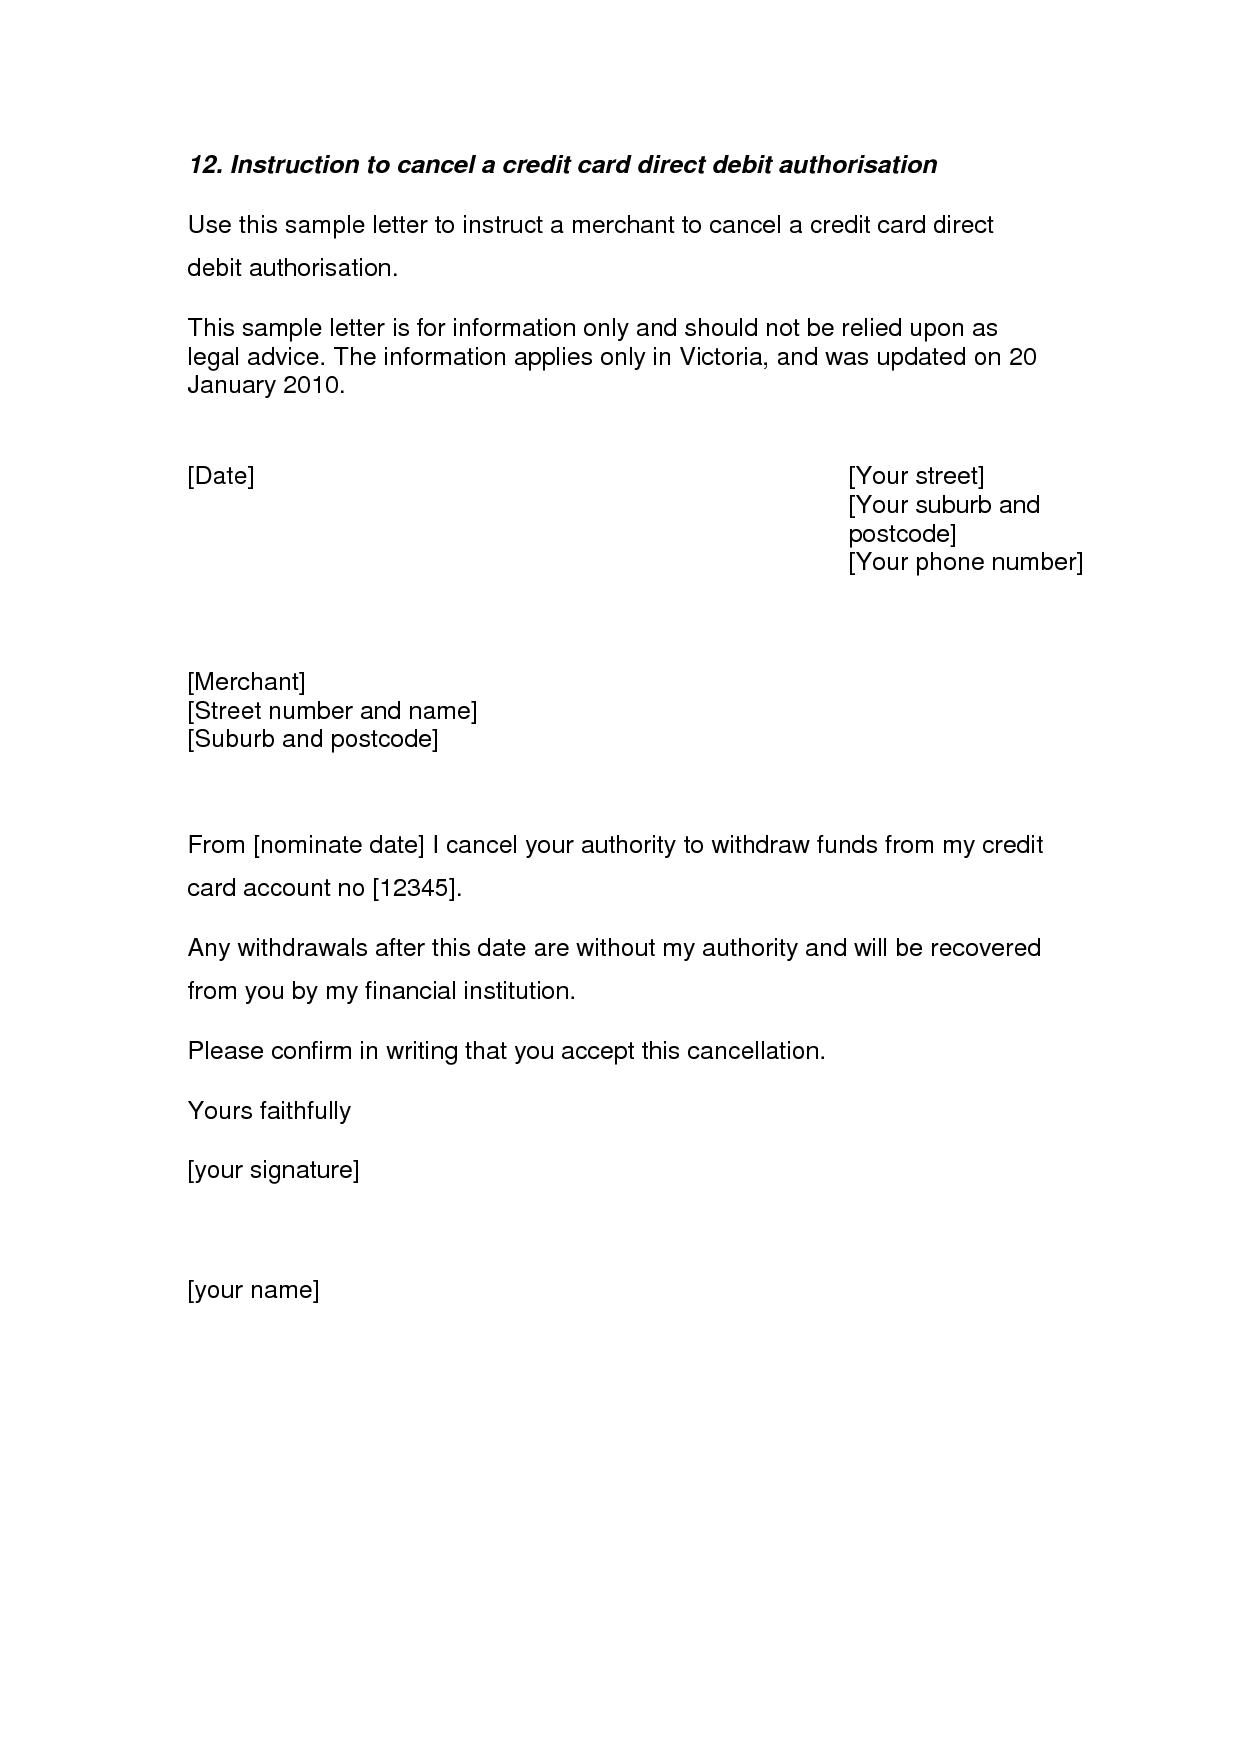 Mortgage Loan Approval Letter Template - Credit Card Cancellation Letter A Credit Card Cancellation Letter